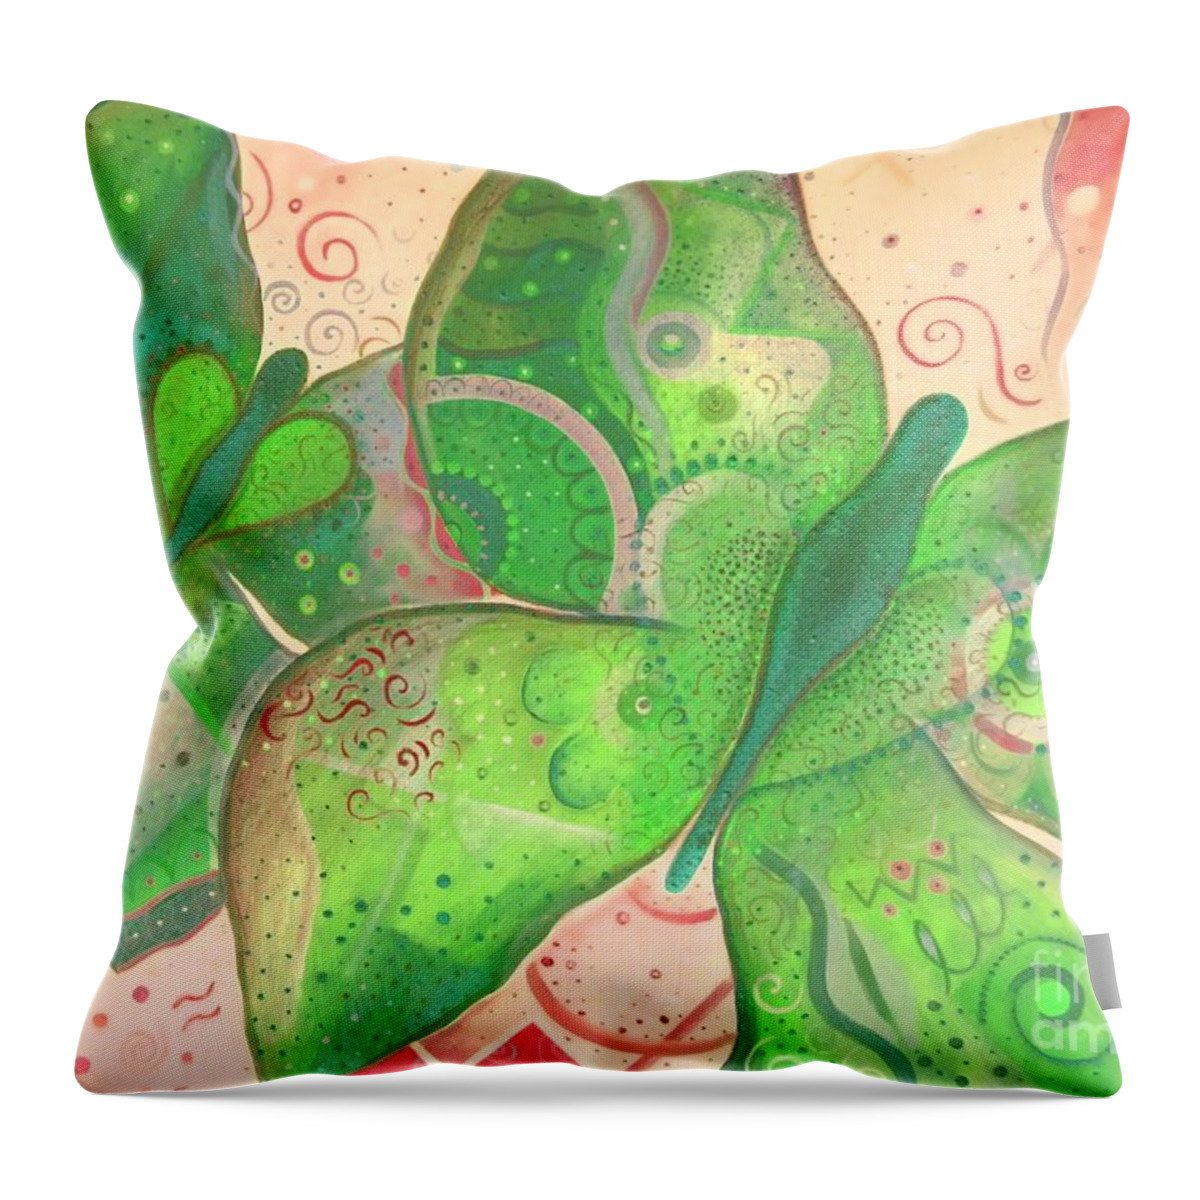 Moth Throw Pillow featuring the painting Lighthearted In Green On Red by Helena Tiainen